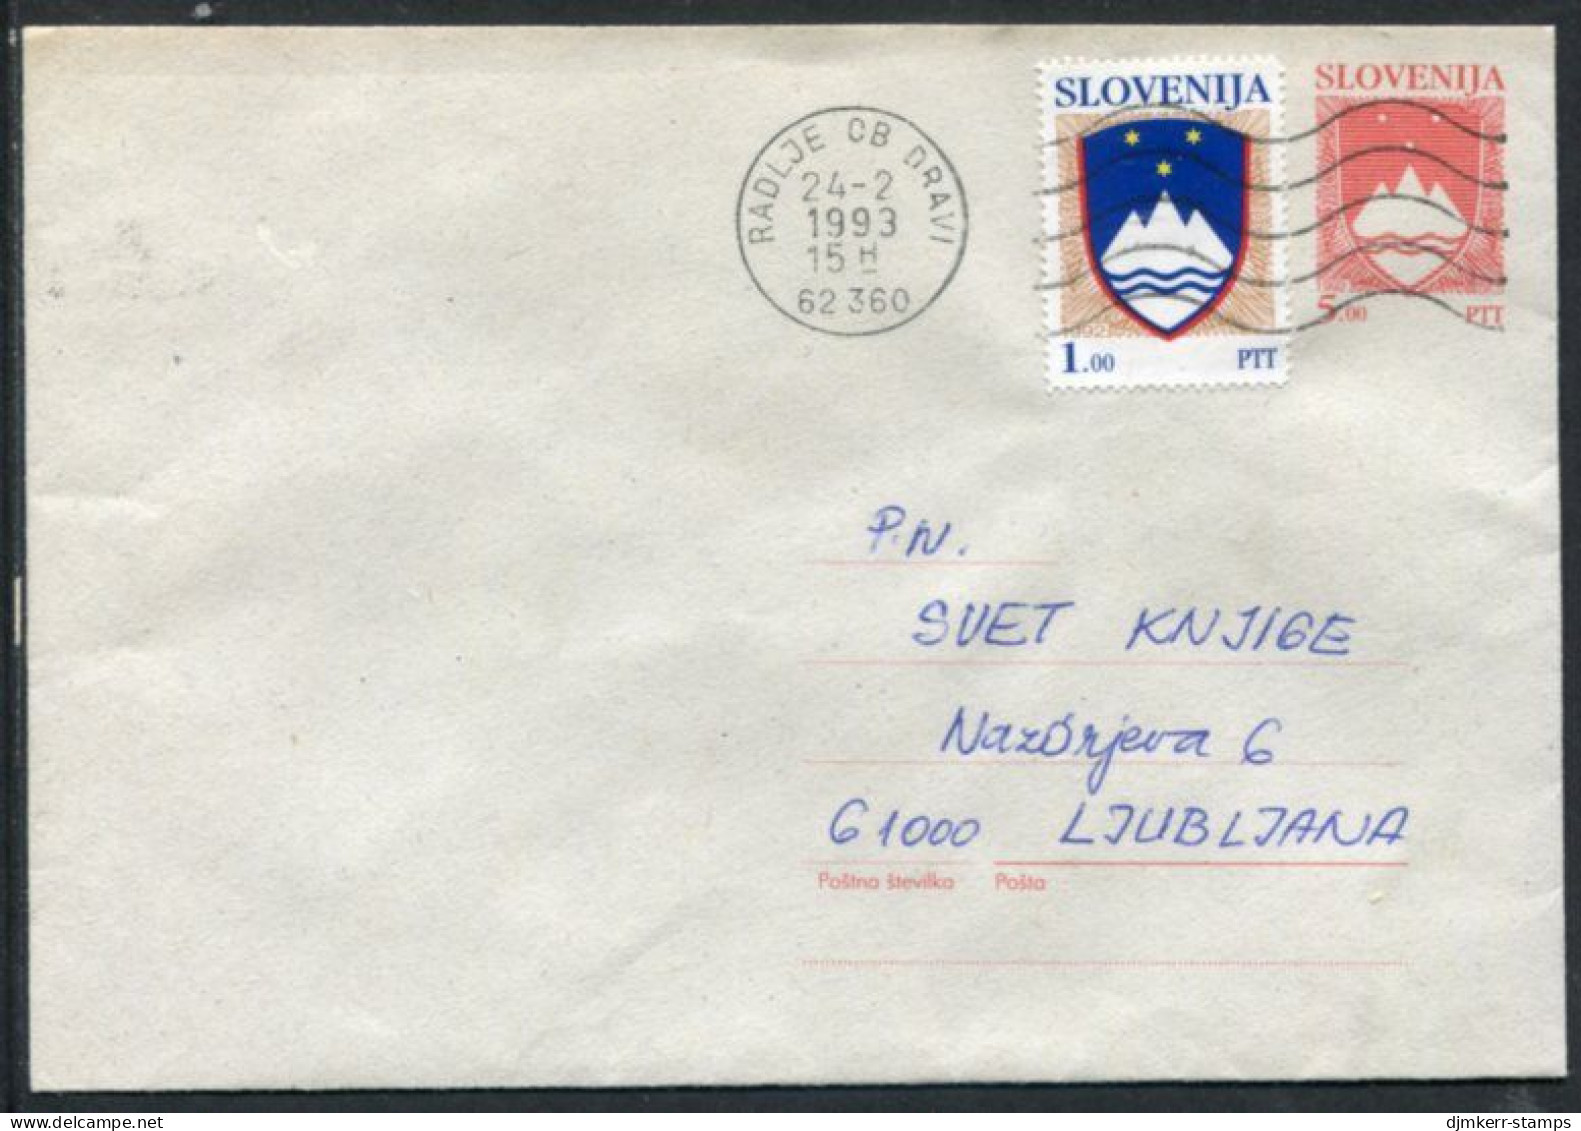 SLOVENIA 1992 5.00 T.  Postal Stationery Envelope On Grey Paper Used With Added 1 T. Stamp.  Michel U1b - Slowenien